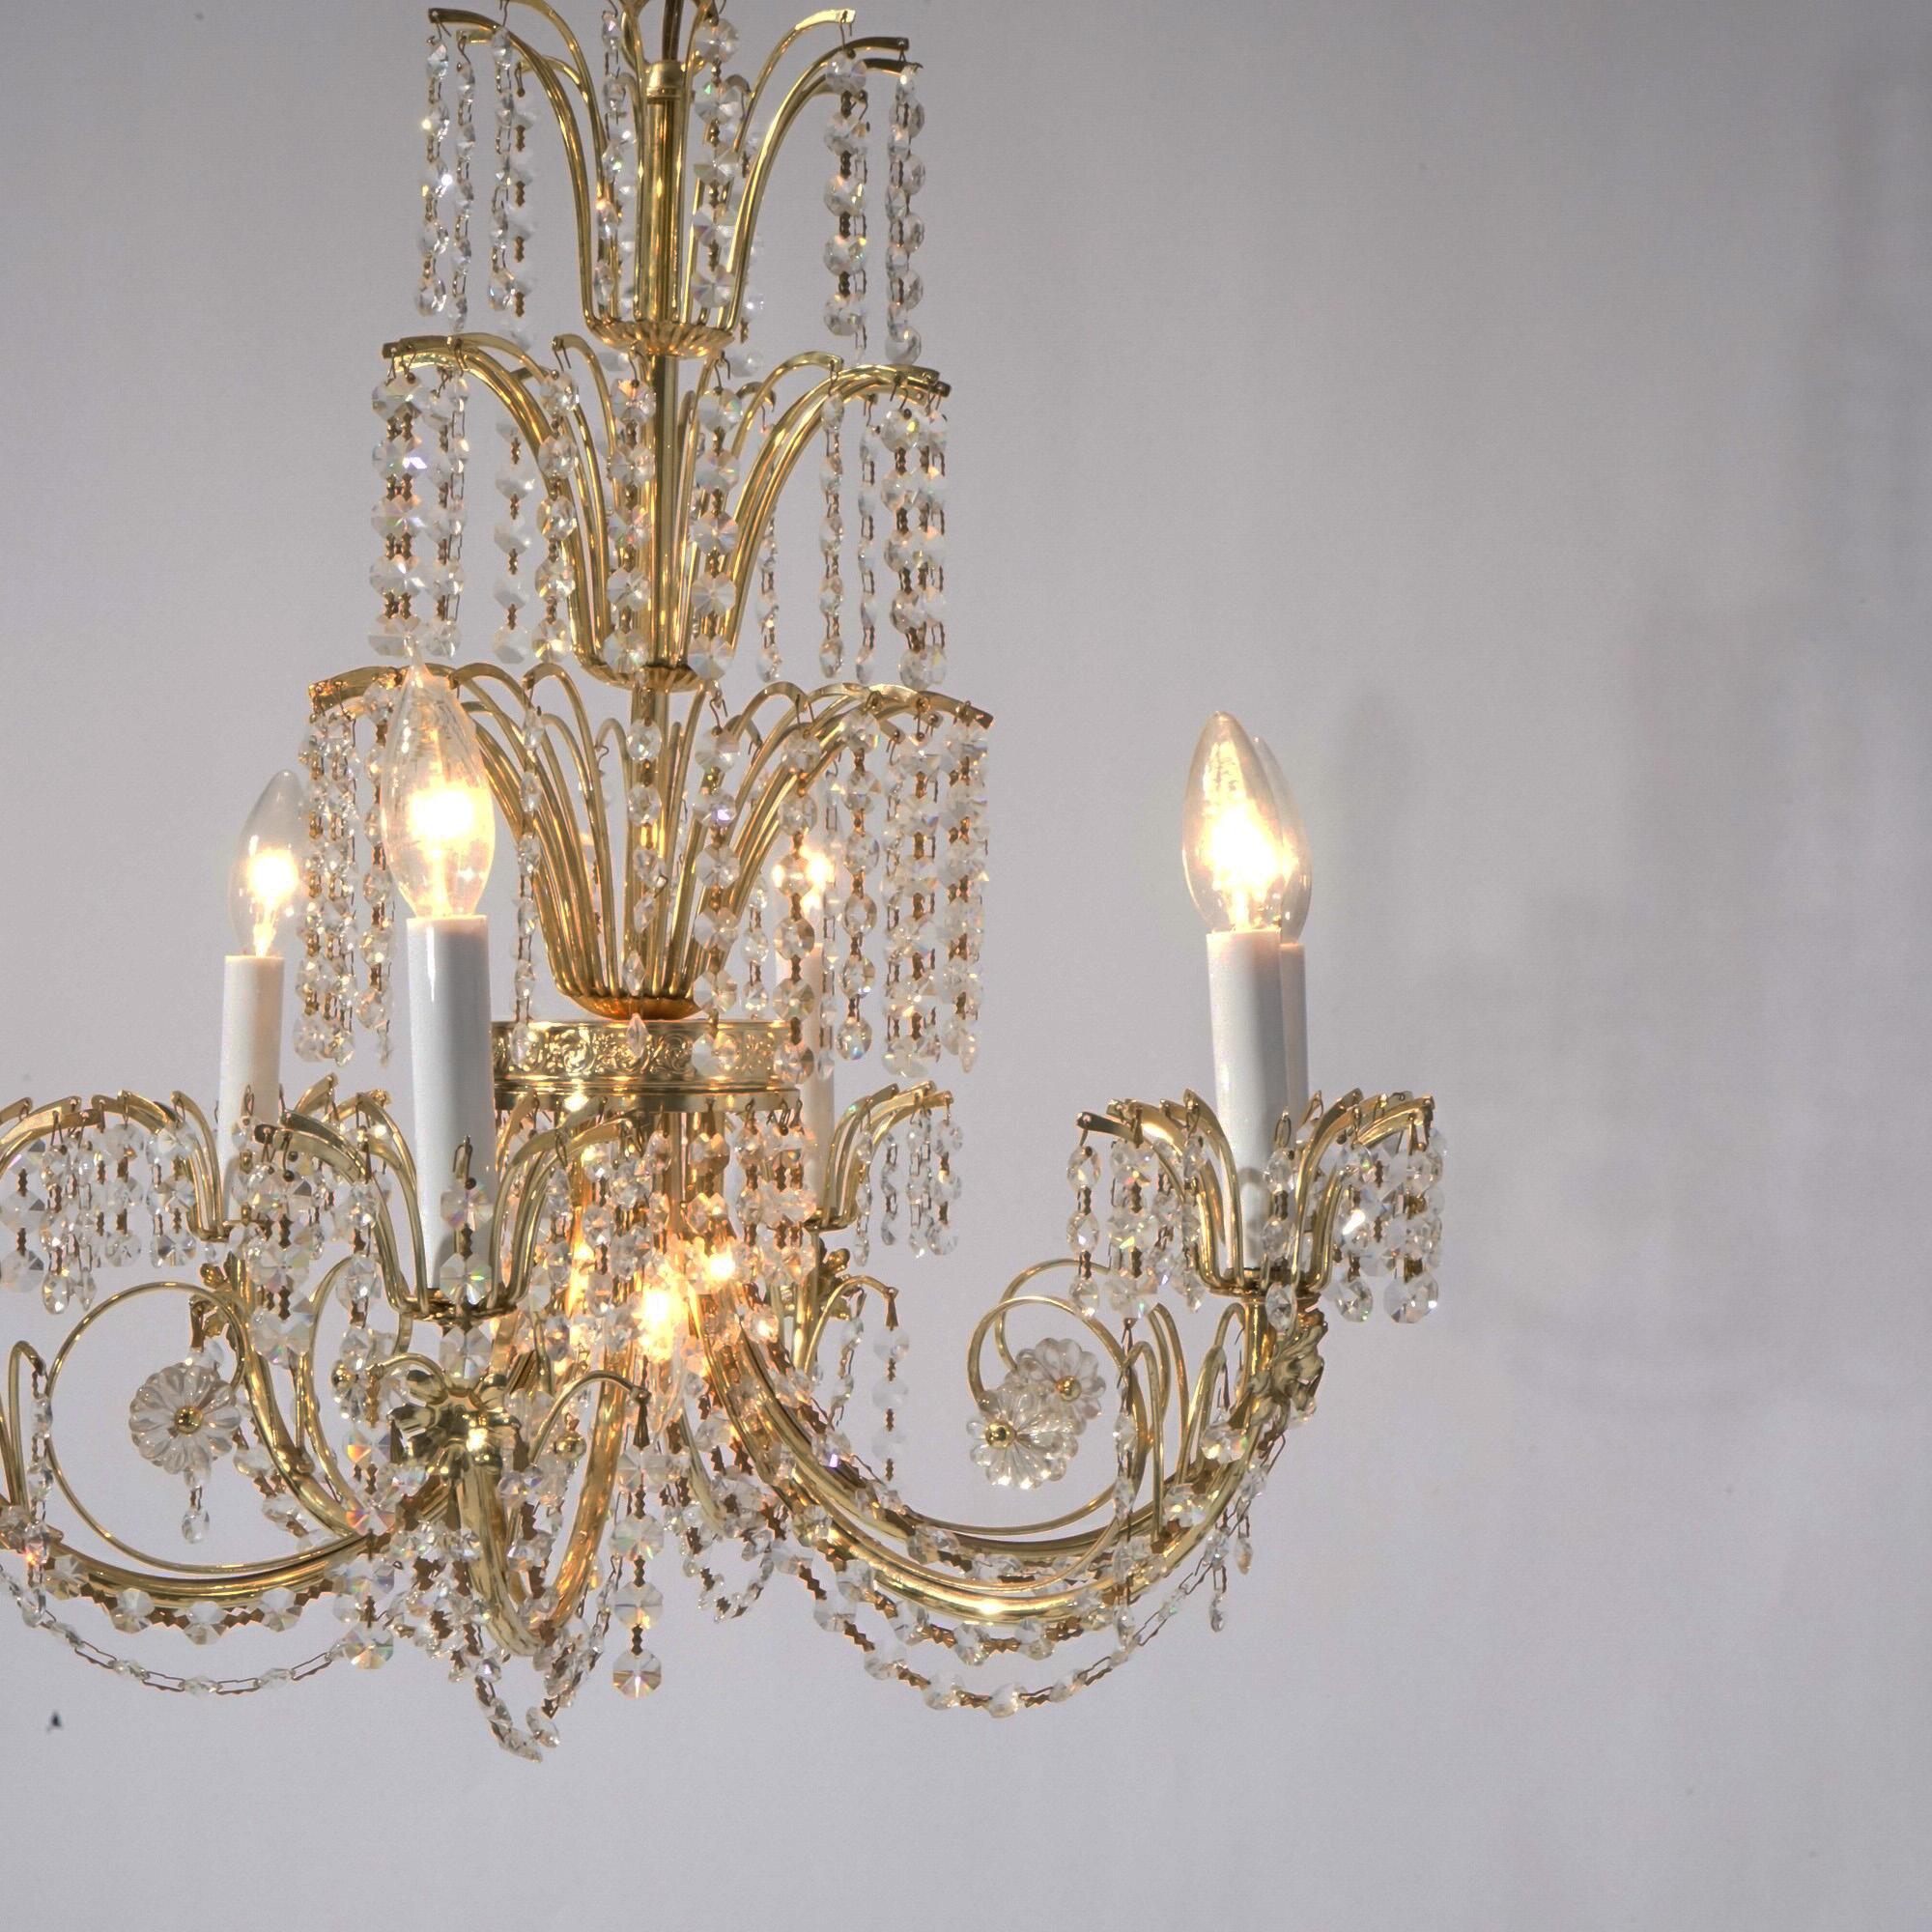 French Style Brass & Crystal Tiered Prism Chandelier 20th C For Sale 2